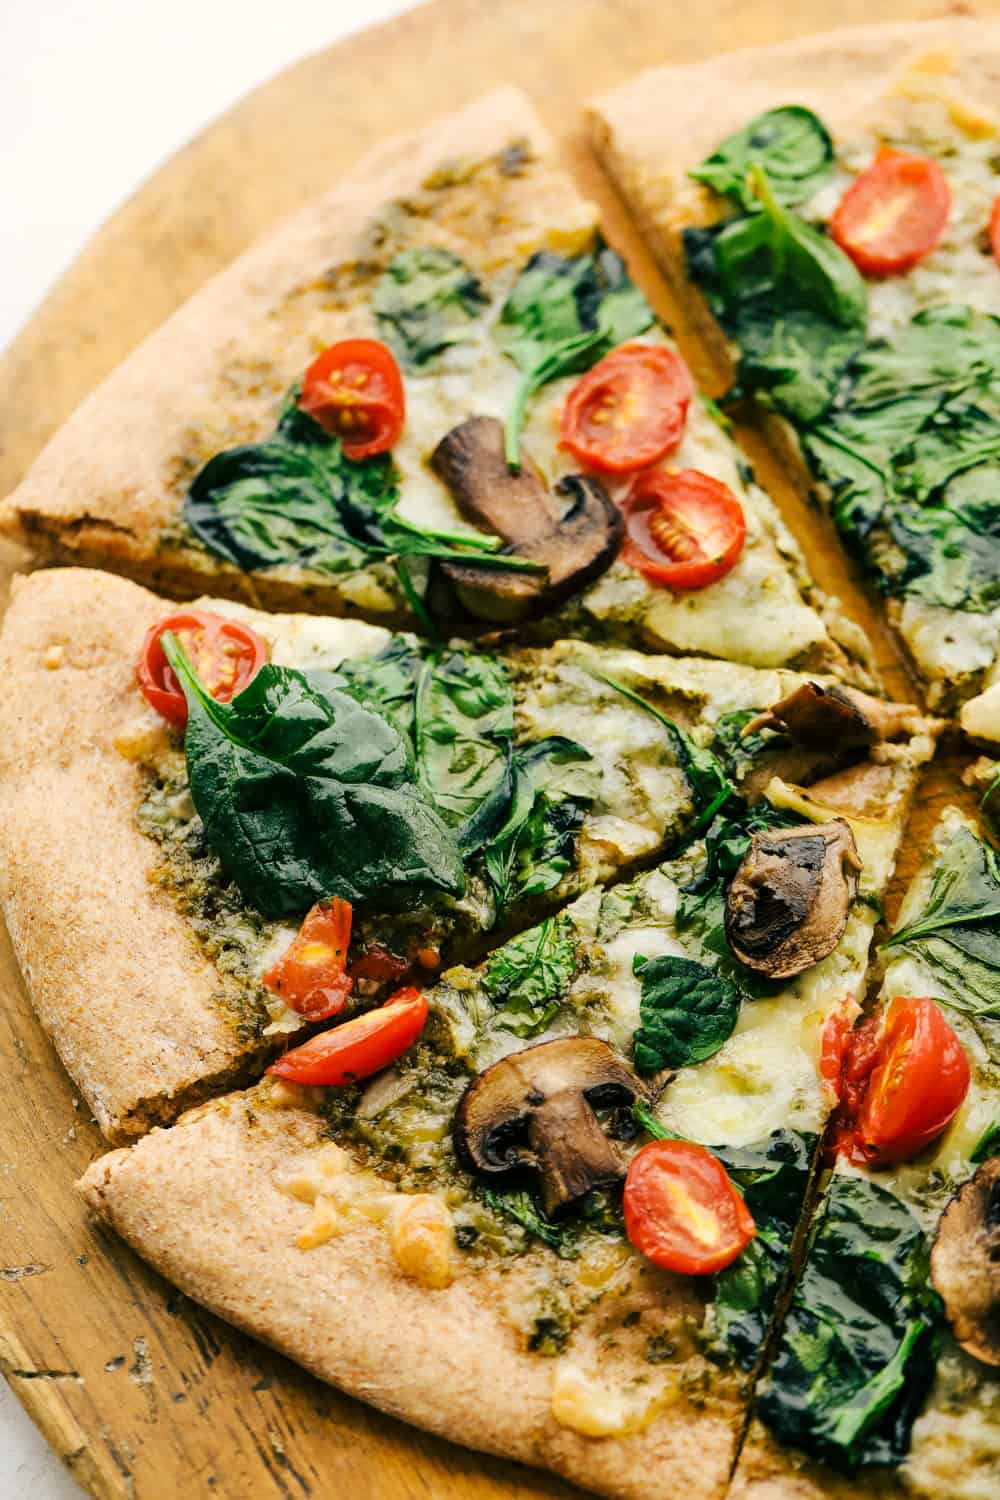 Whole wheat pizza dough topped with spinach, mushrooms and tomatoes.